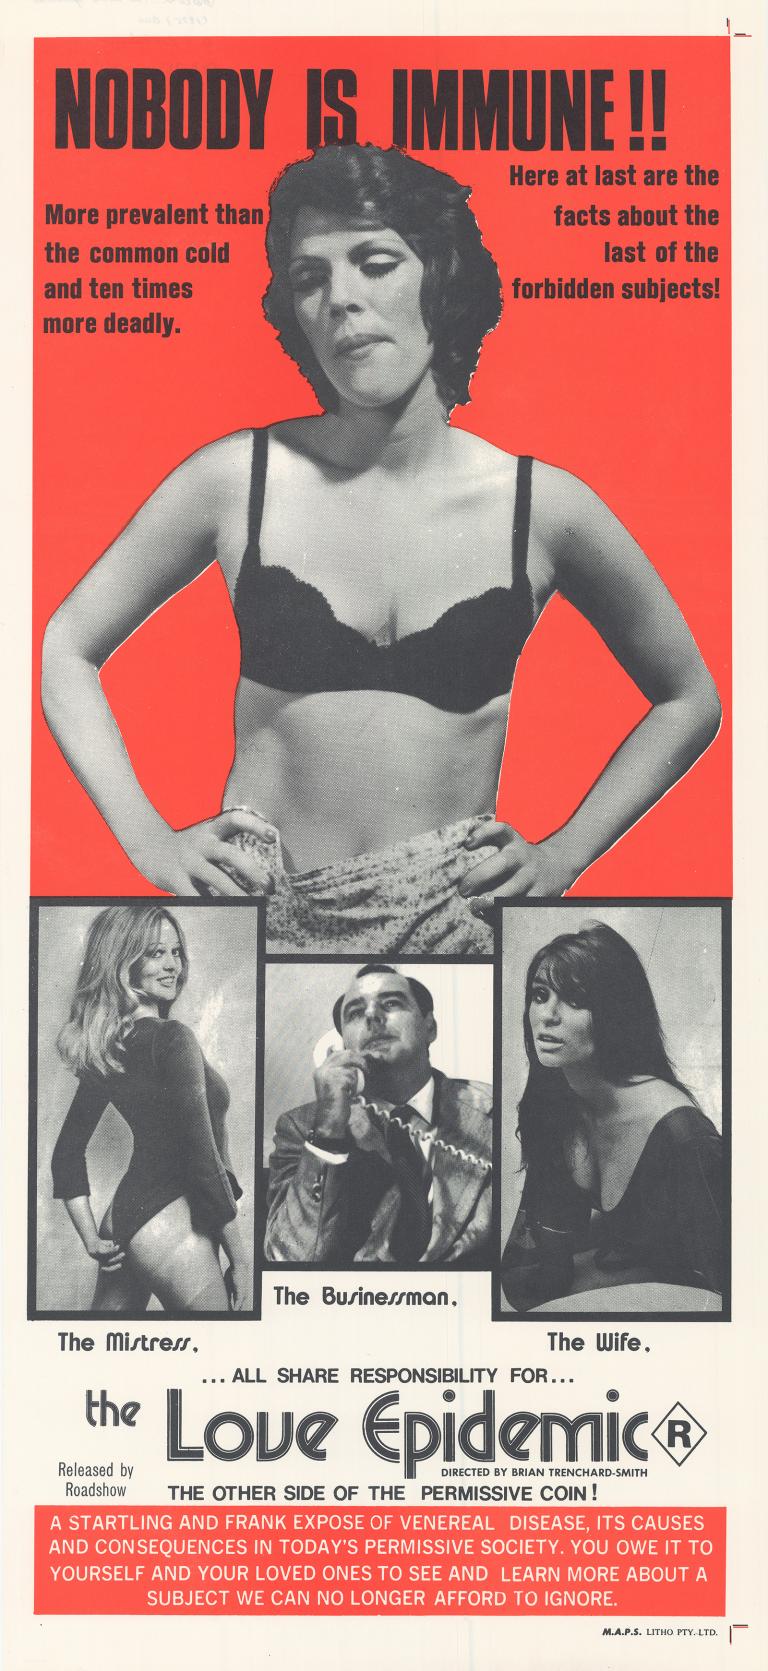 Daybill poster for film 'The Love Epidemic'. Main image of a woman standing with hands on hips wearing a bra. Three smaller framed images are underneath with film title and credits. Background colour is red and the tagline is "Nobody is immune!!"